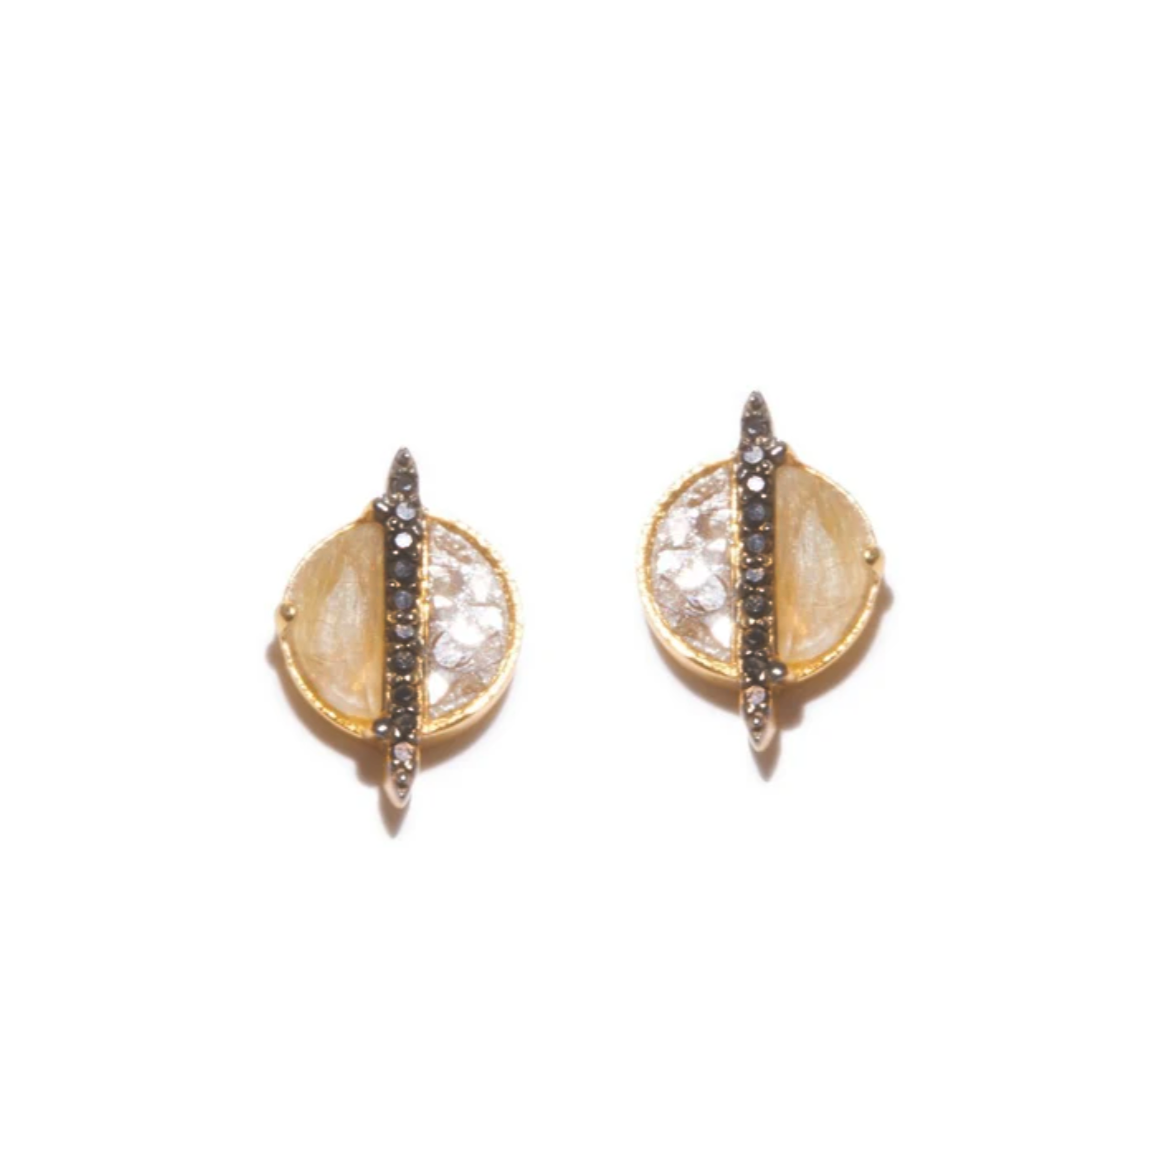 a pair of gold stud earrings with diamond slices set in resin, moonstone, and diamond pave down the center on a white background